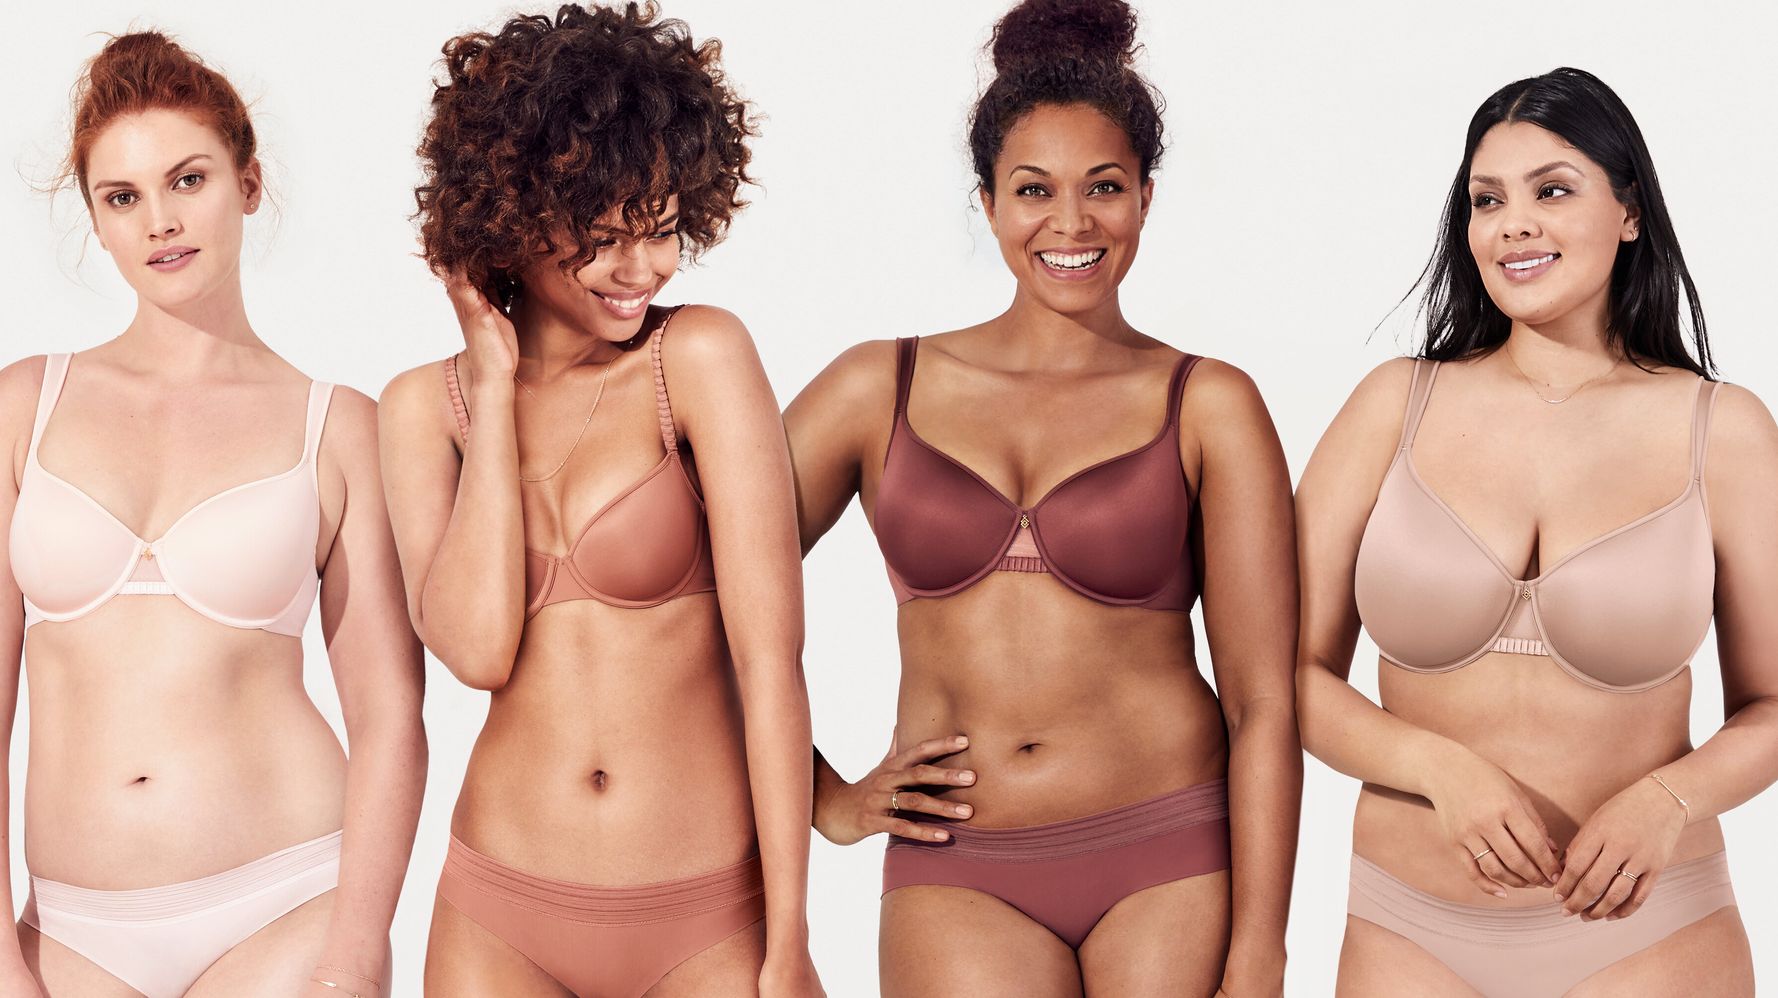 ThirdLove Bra Size Chart - Find The Perfect Bra For Your Cup Size